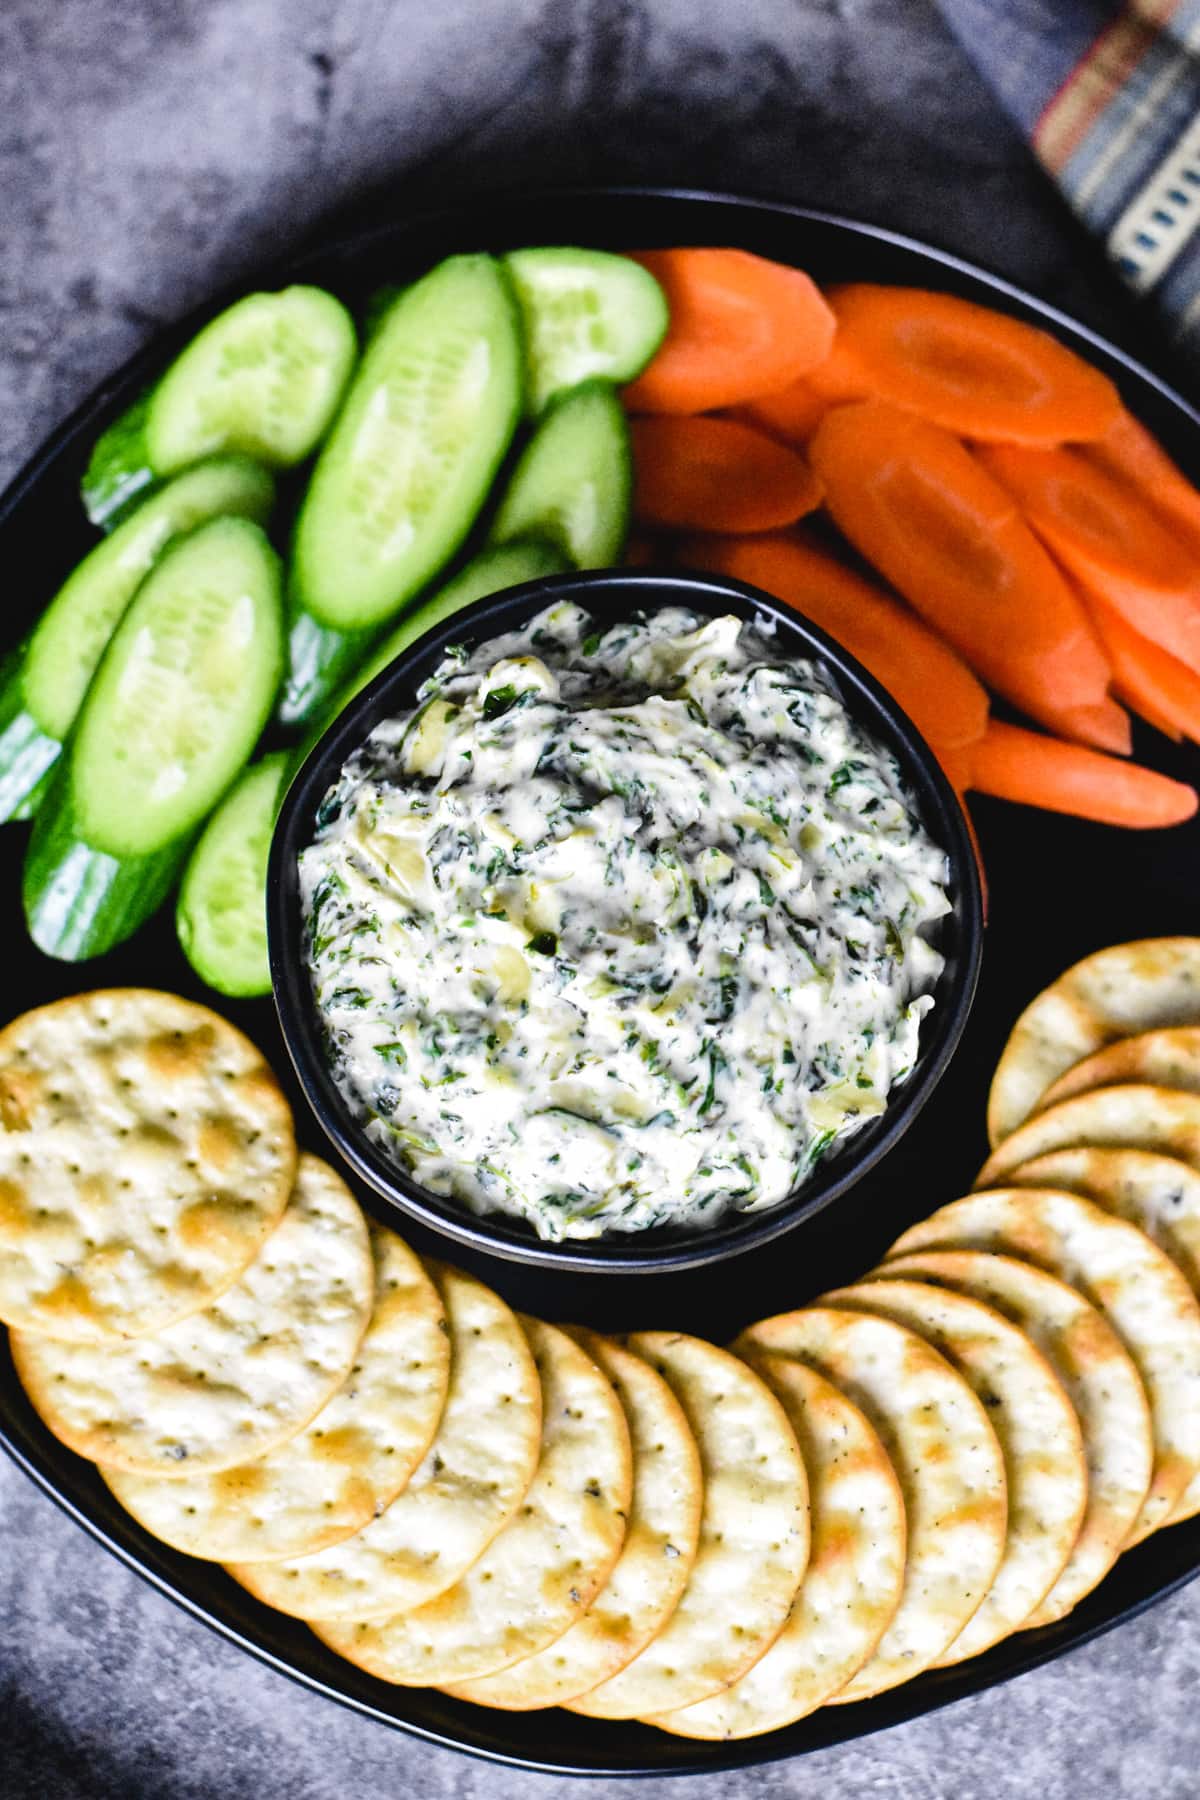 Spinach artichoke dip in bowl with carrots, cucumber and crackers